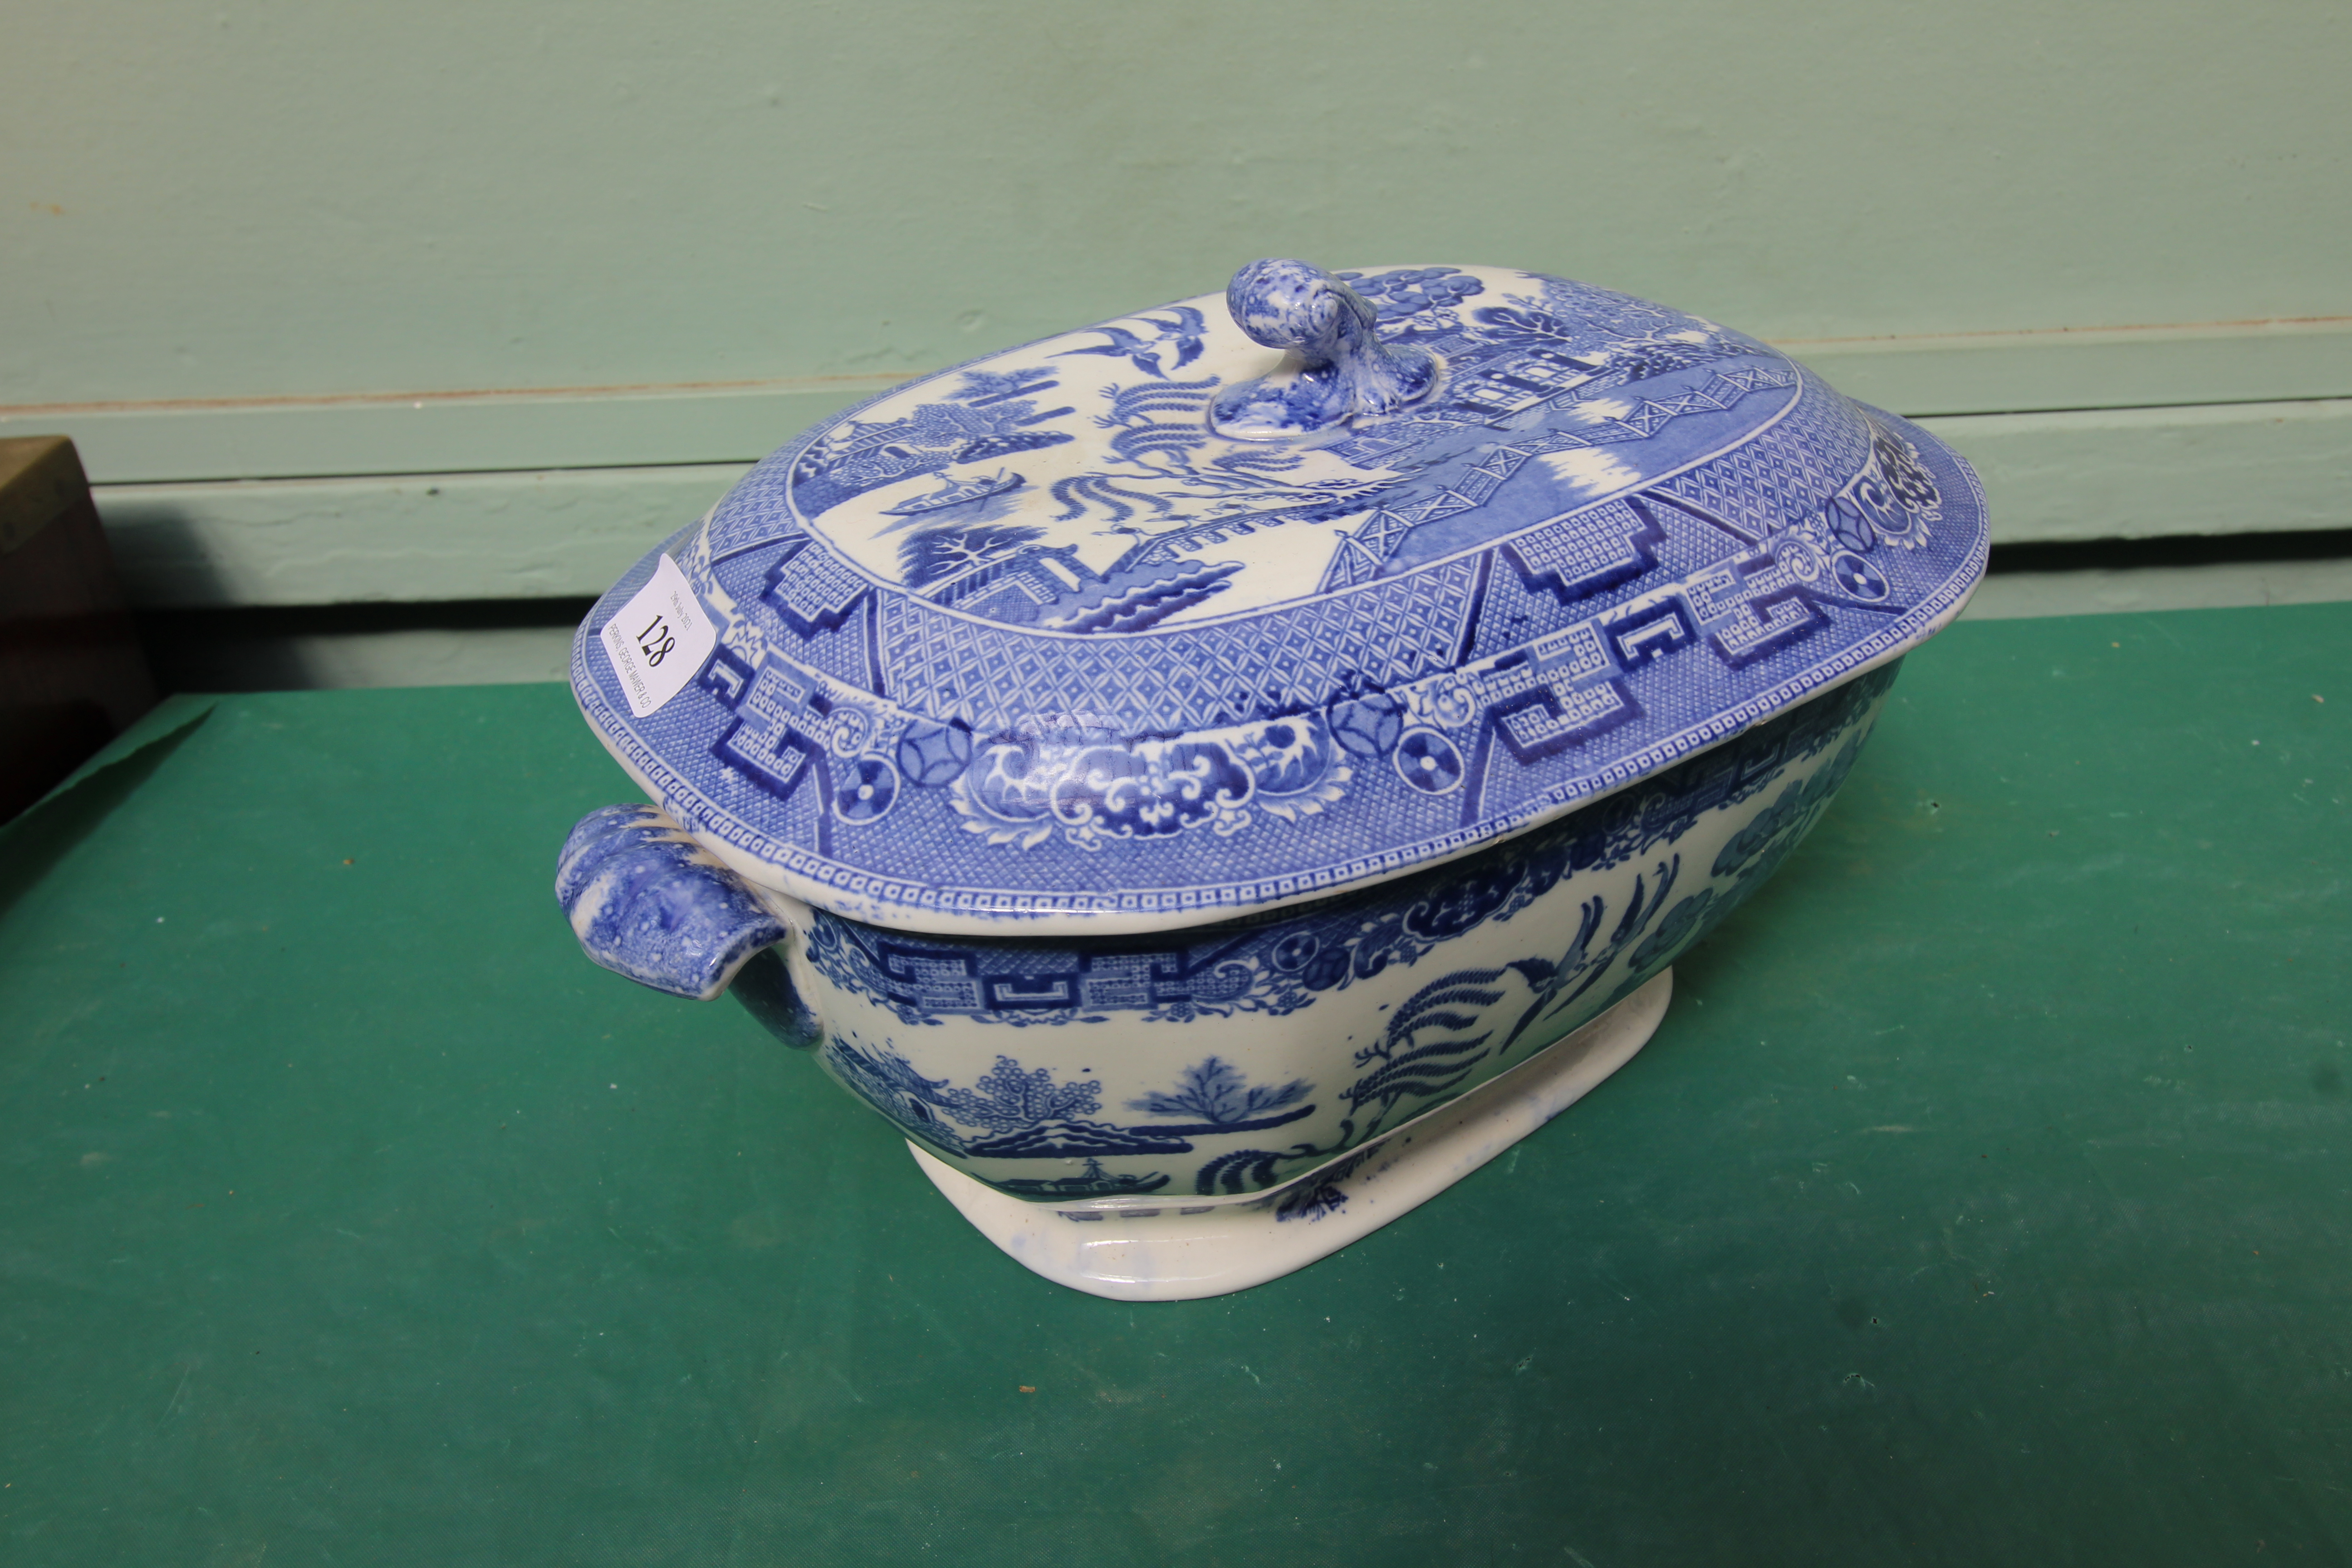 Large lidded willow patterned casserole